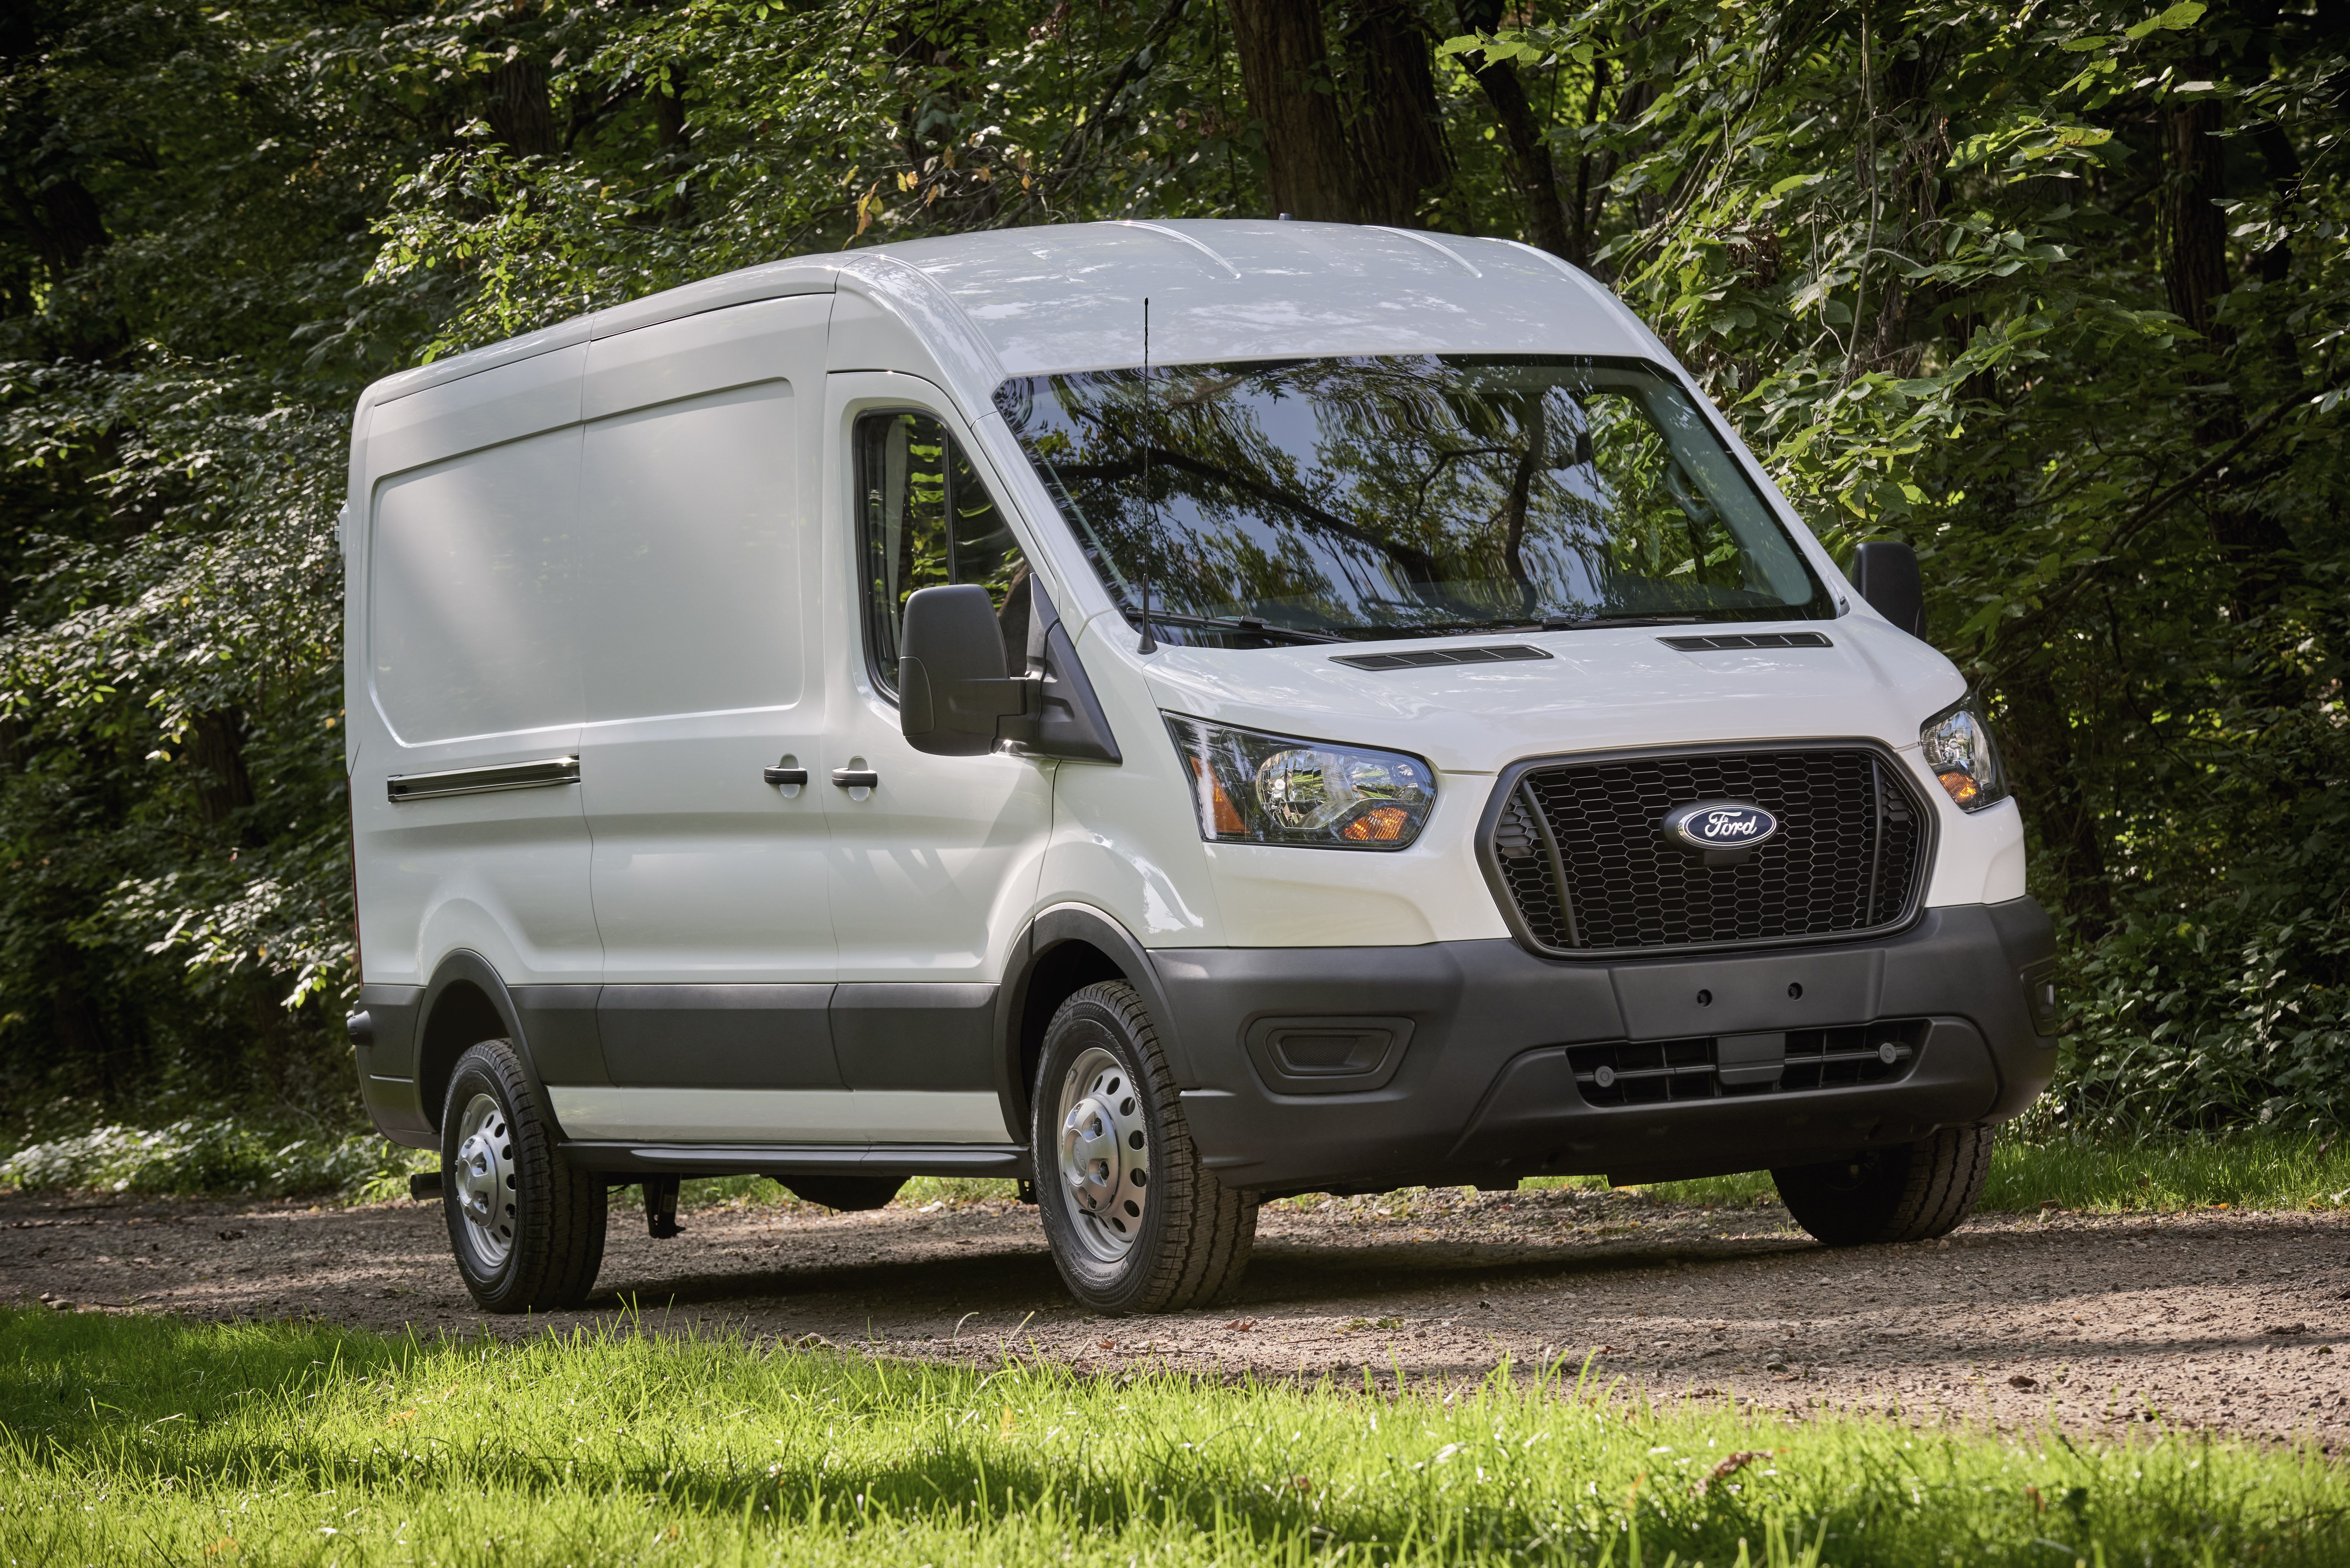 Форд транзит 2021г. Ford Transit 2021. Ford Транзит 2021. Ford Transit 2021 грузовой. Форд Транзит грузовой 2021.